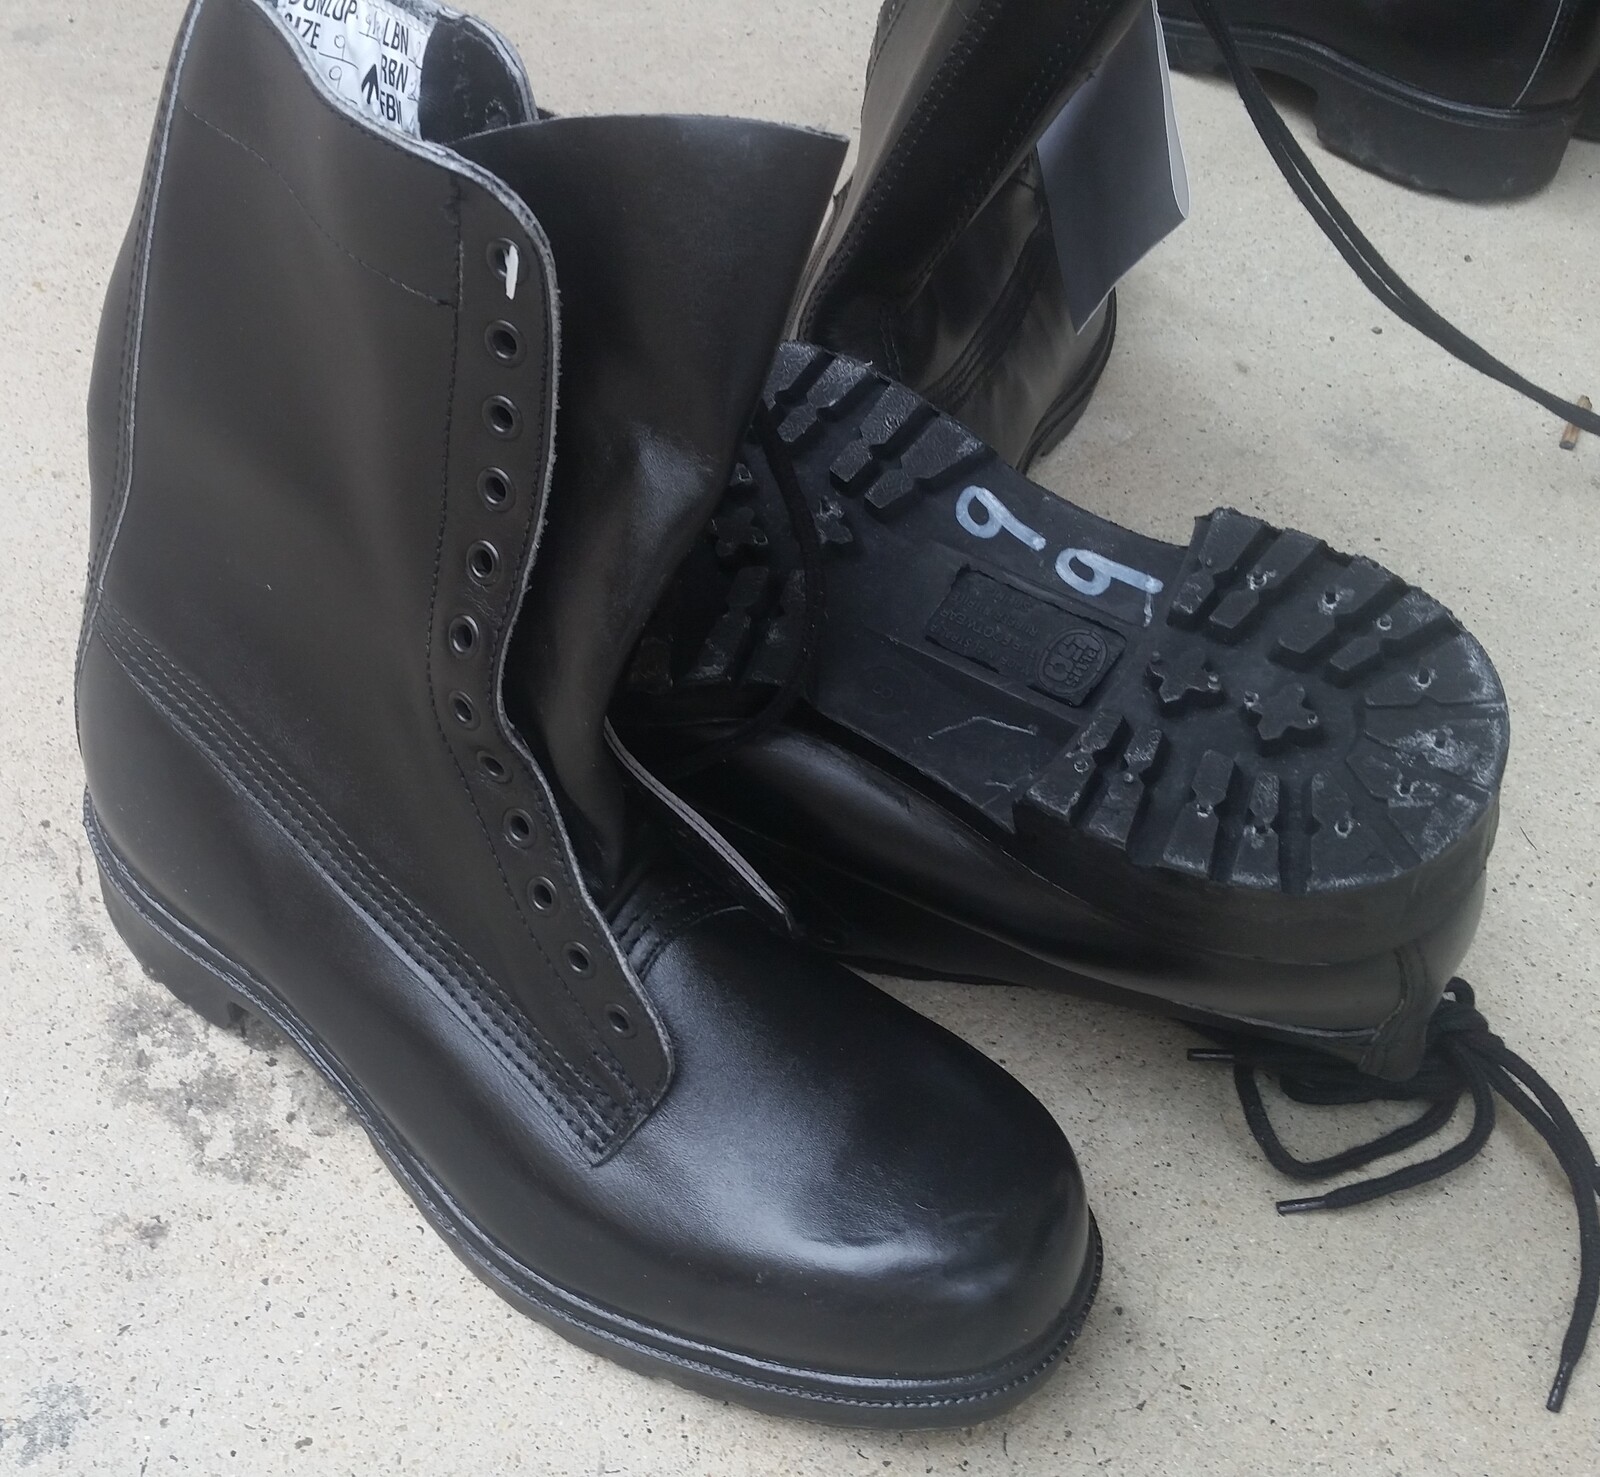 EX-ADF G.P. BOOTS BLACK LEATHER NEW